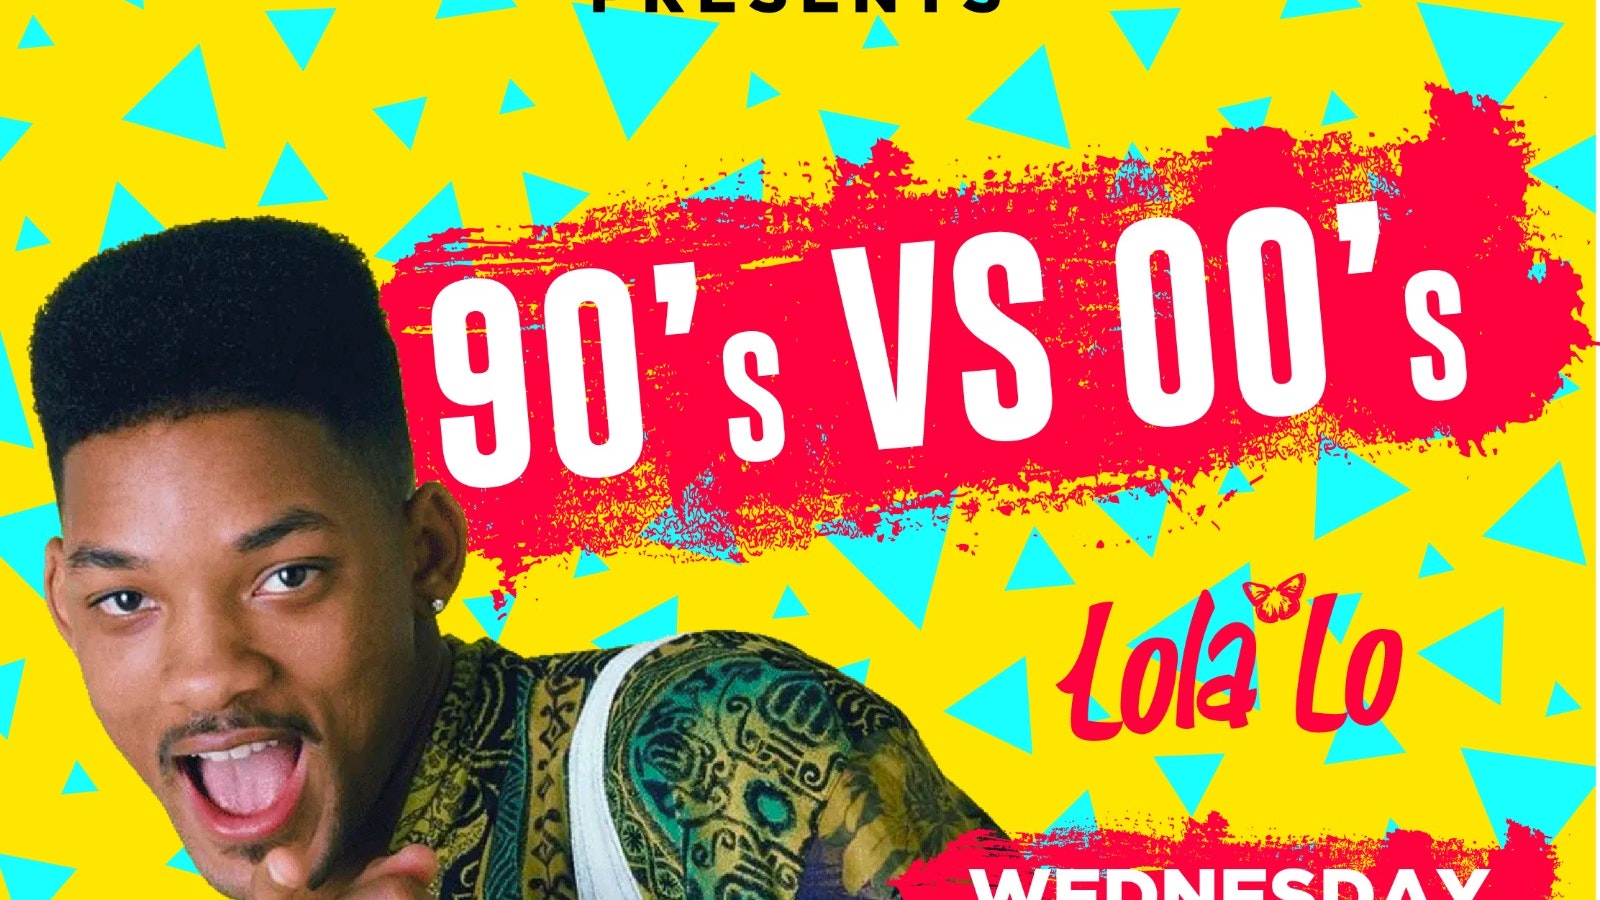 90’s VS 00’s (Bank Holiday Special) @ LOLA’S